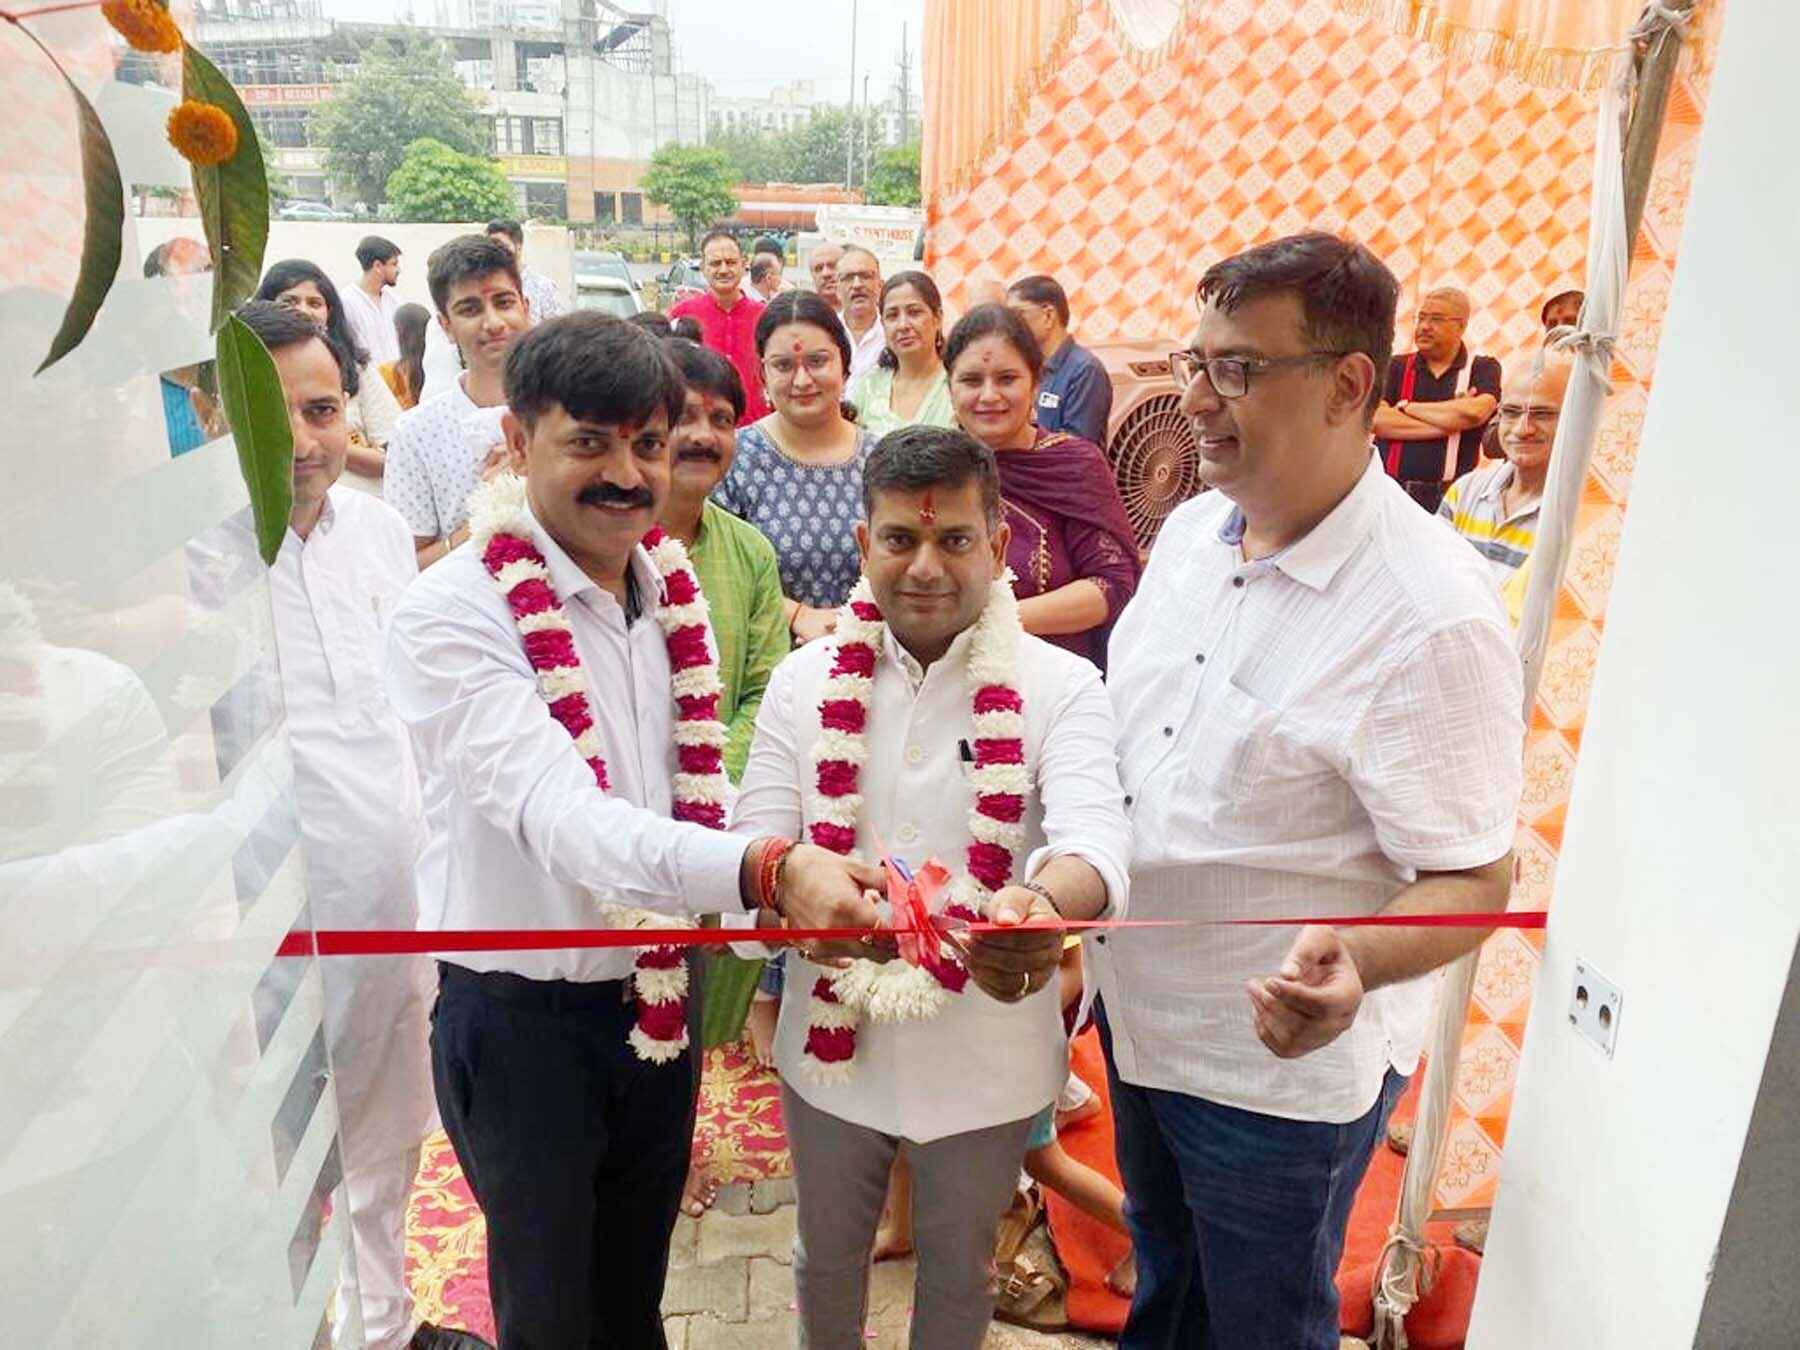 Dr. DP Goyal inaugurating the Physiotherapy Center in Sector-83, Gurugram.